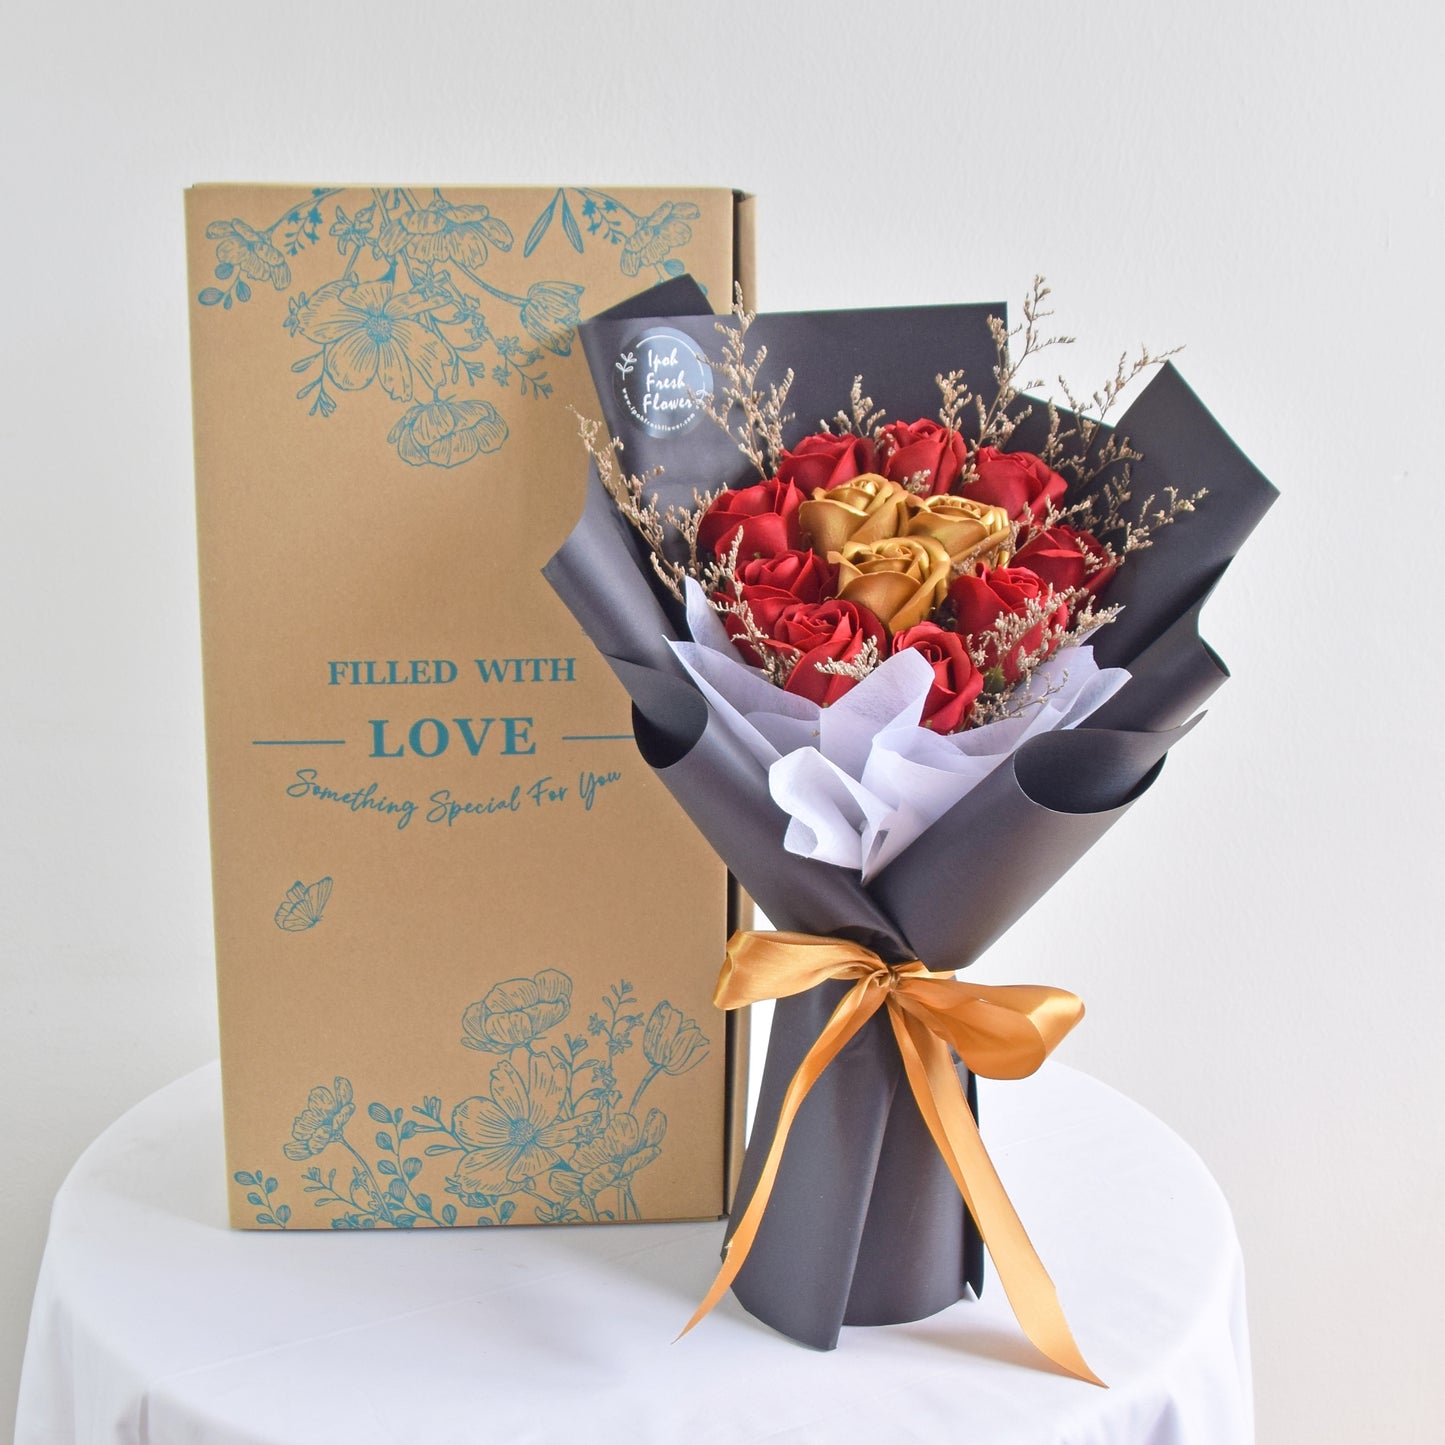 Sparkling Gold| Soap Flower Roses Bouquet| Same Day Free Delivery